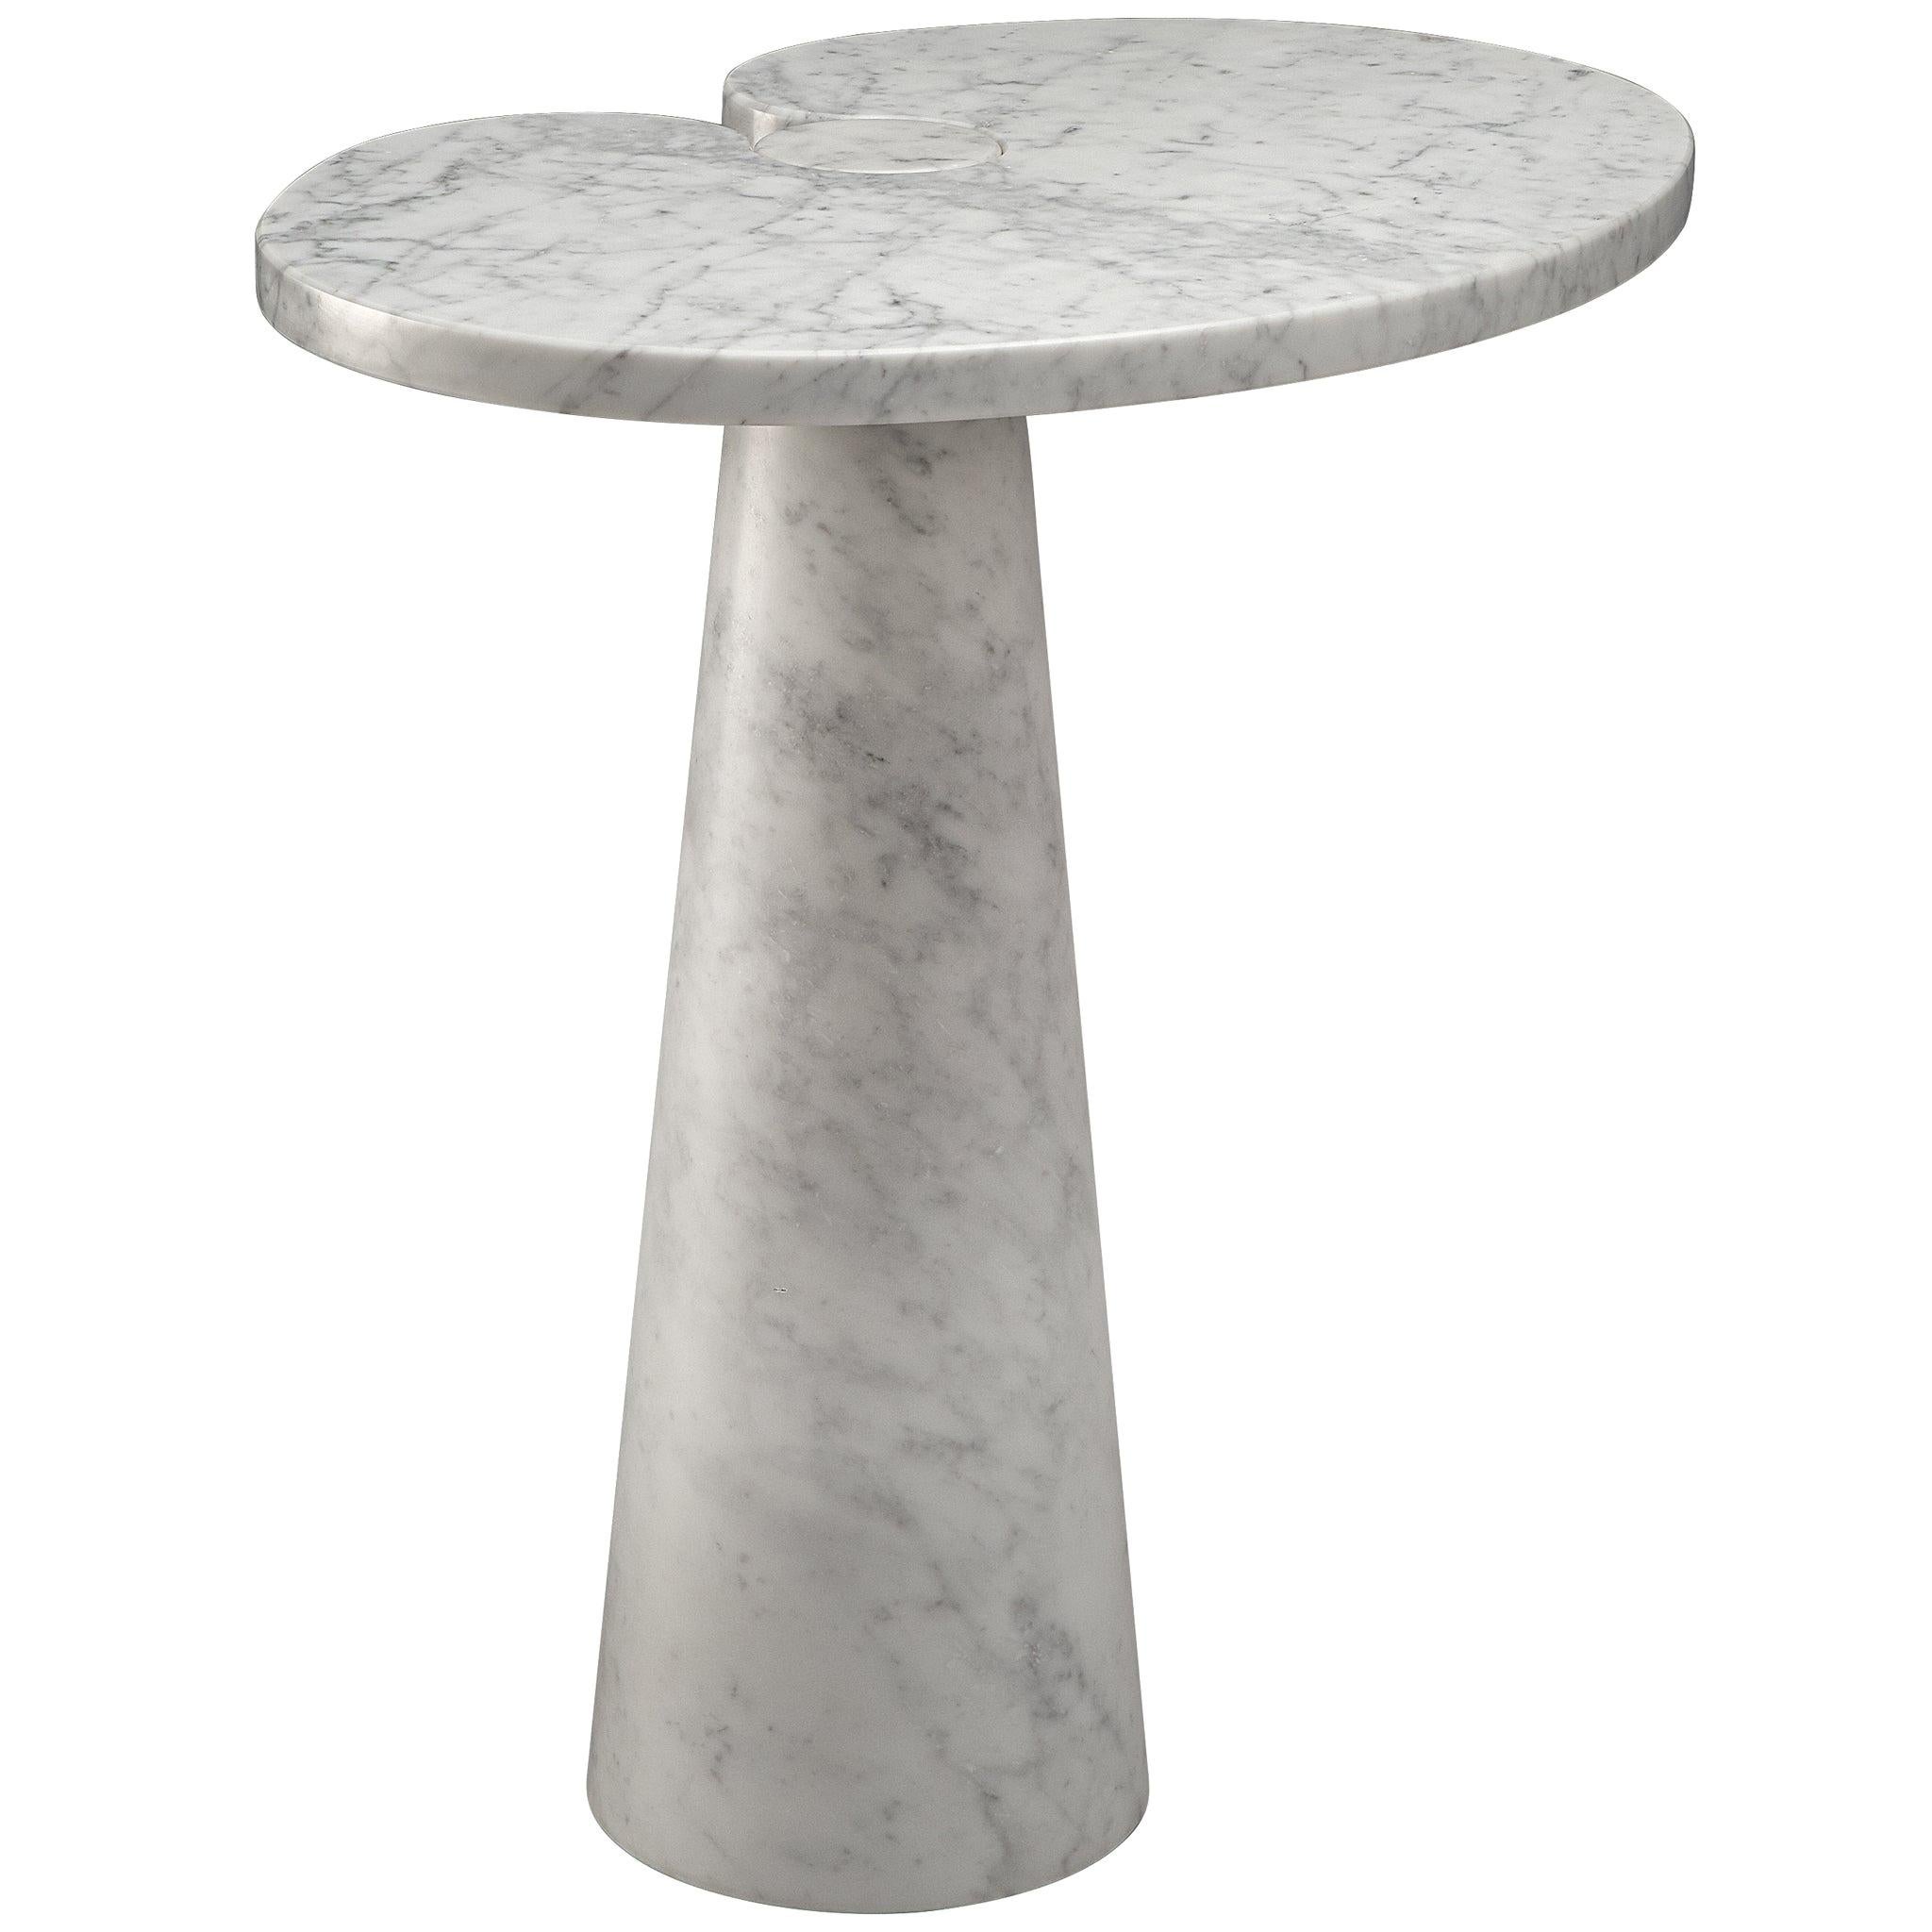 Angelo Mangiarotti 'Eros' Side Table in White Marble